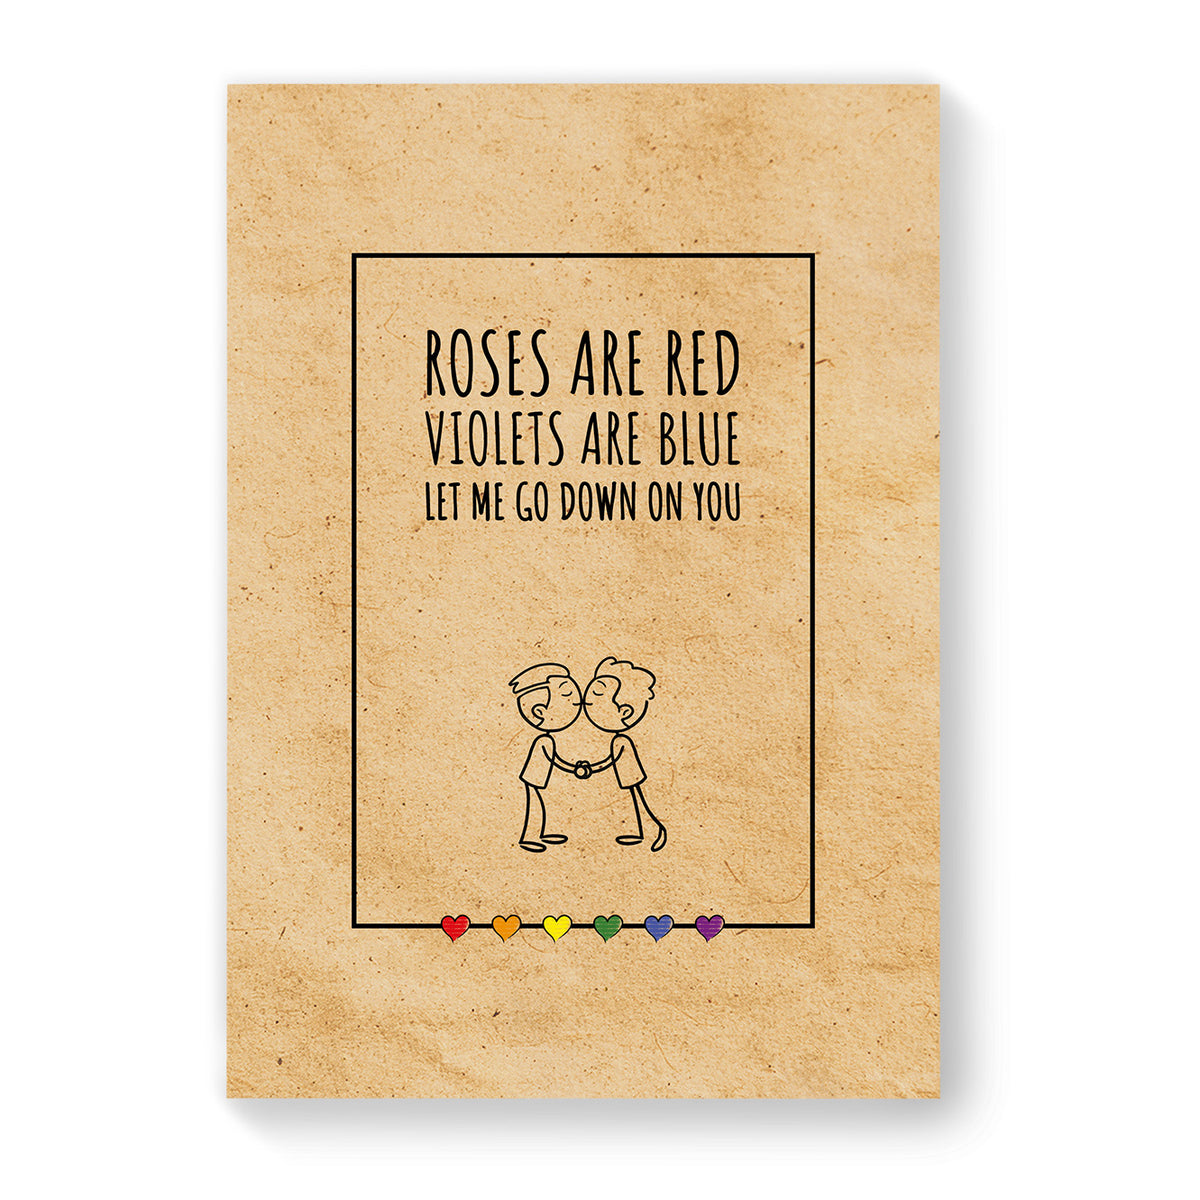 Let me go down on you - Gay Couple Card - Vintage Brown | Gift